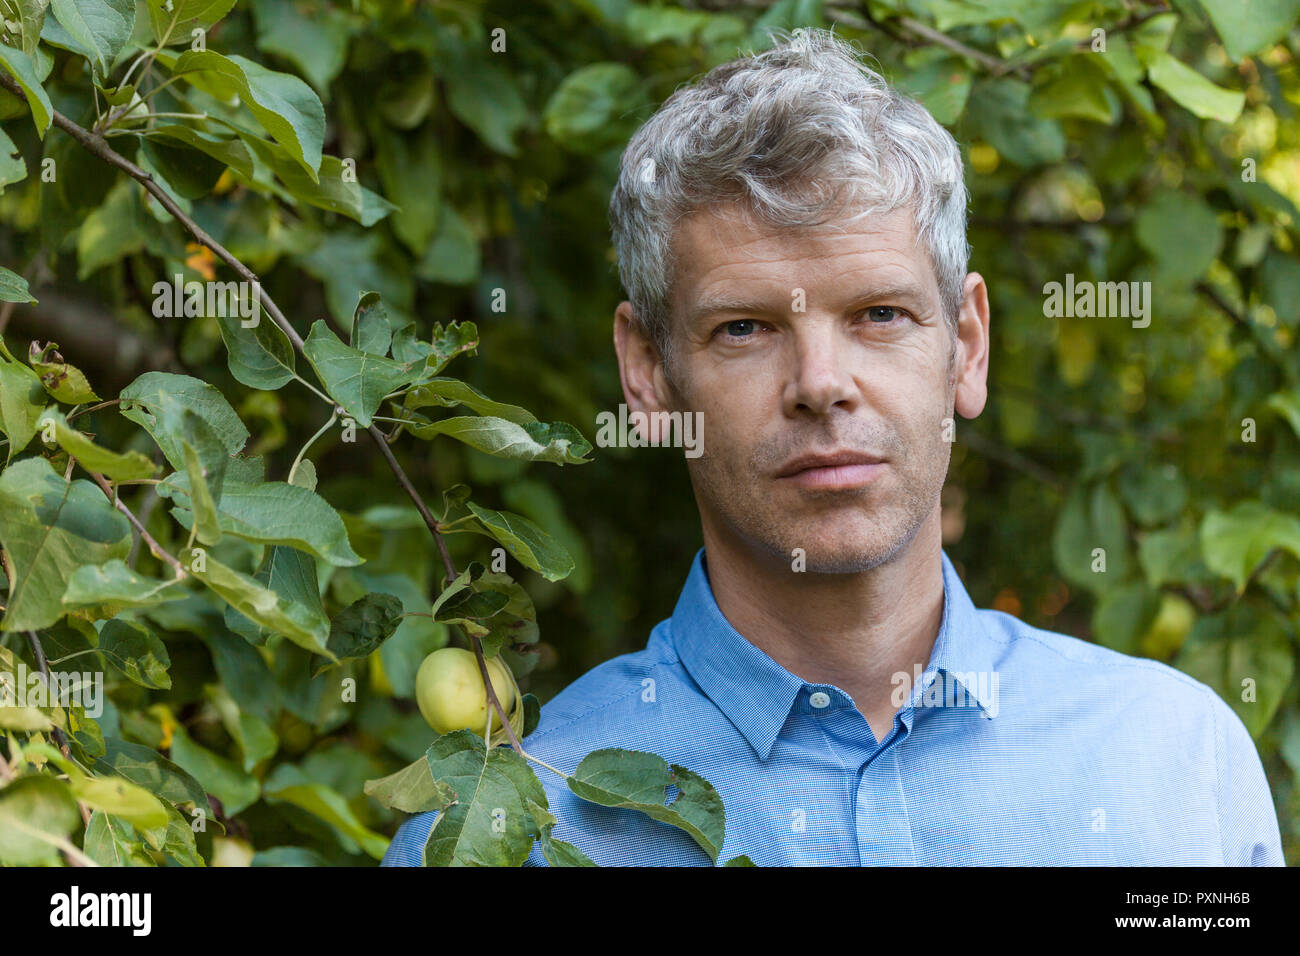 Portrait of mature man with grey hair in the garden Stock Photo